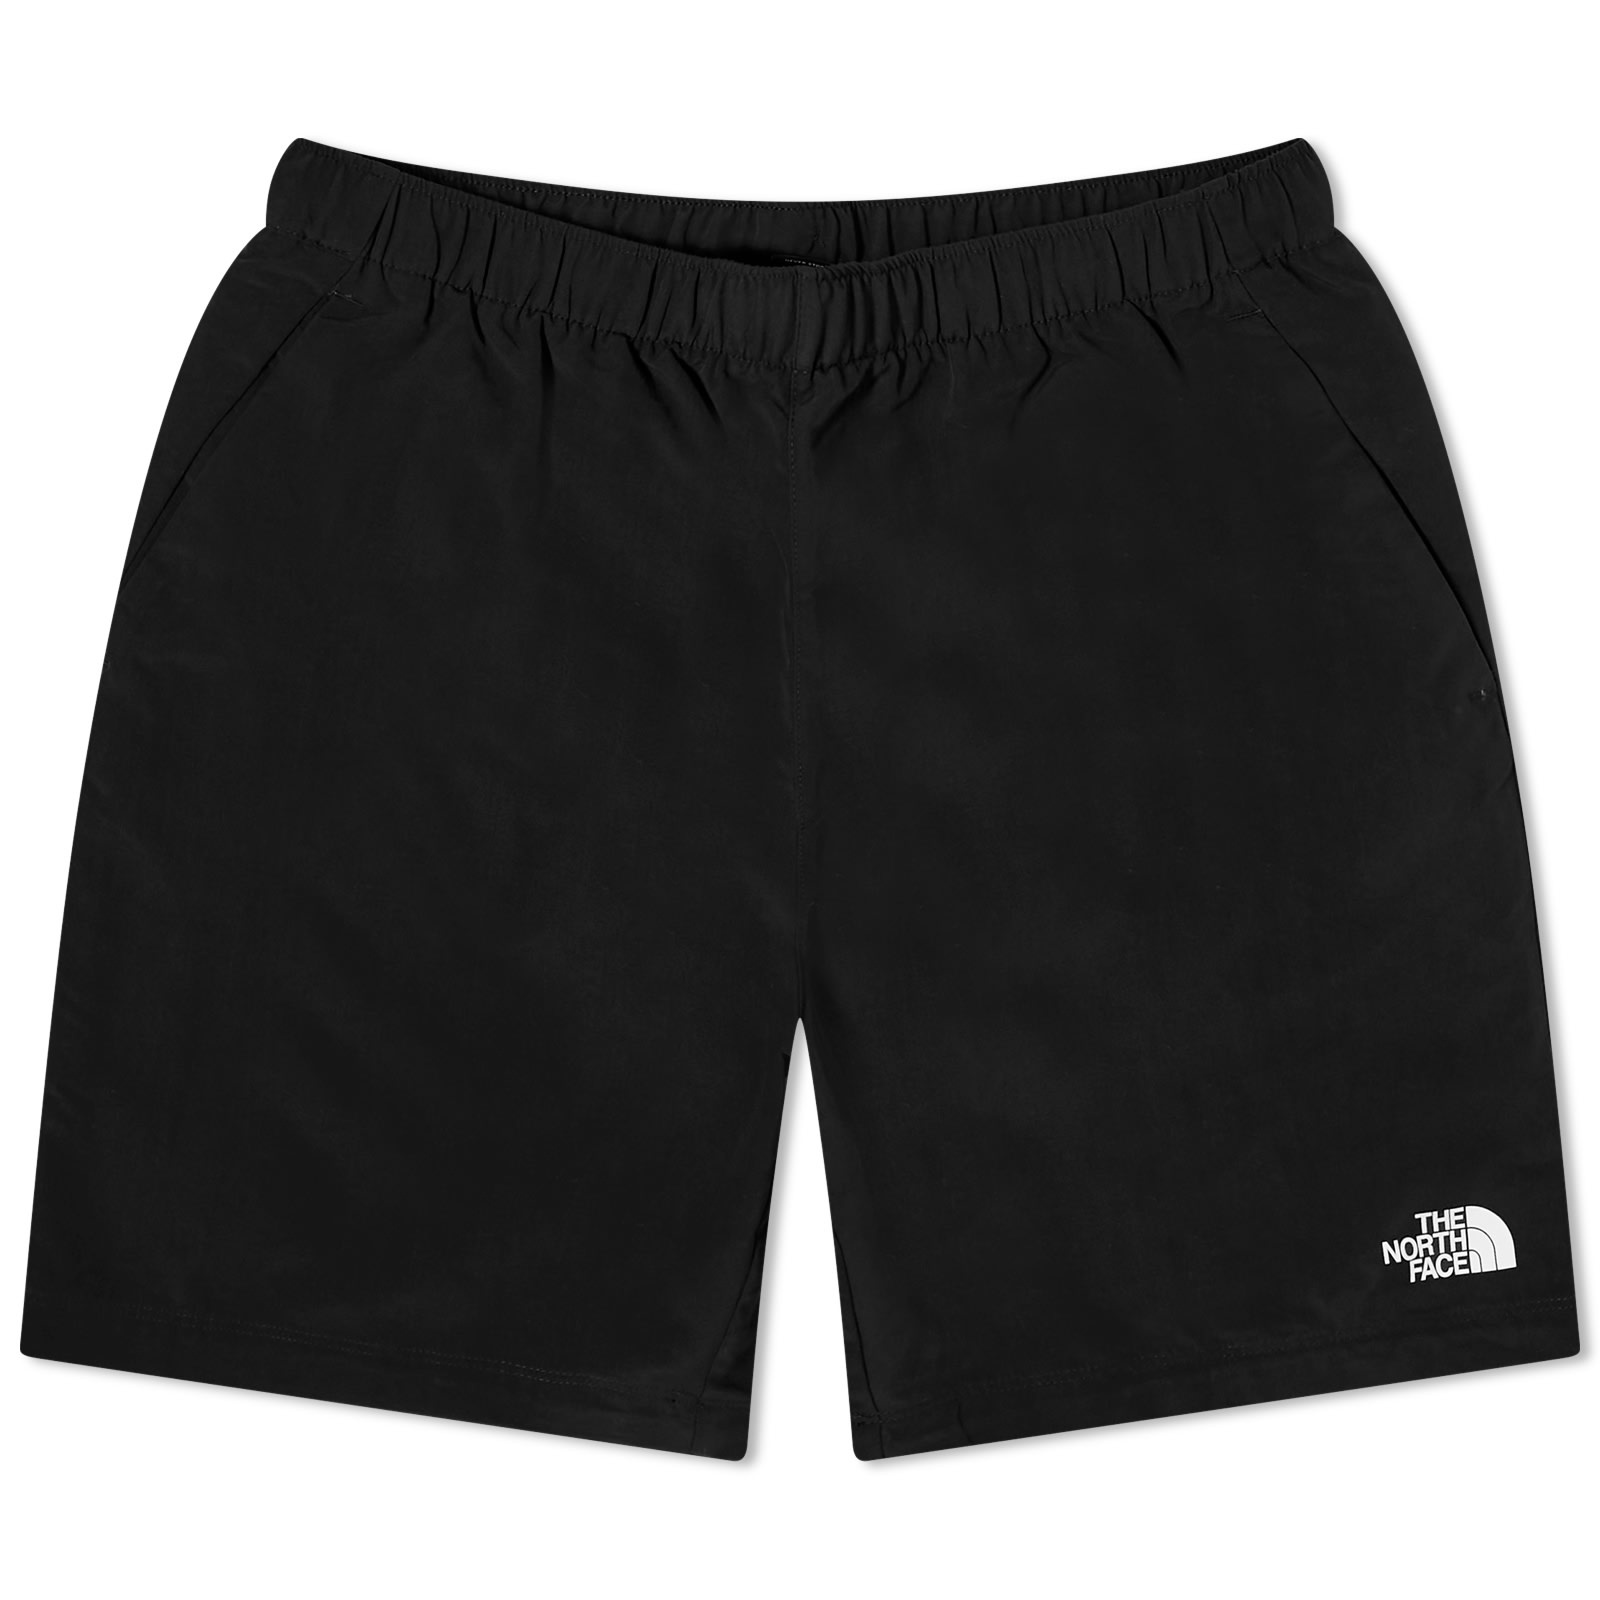 The North Face Water Shorts - 1